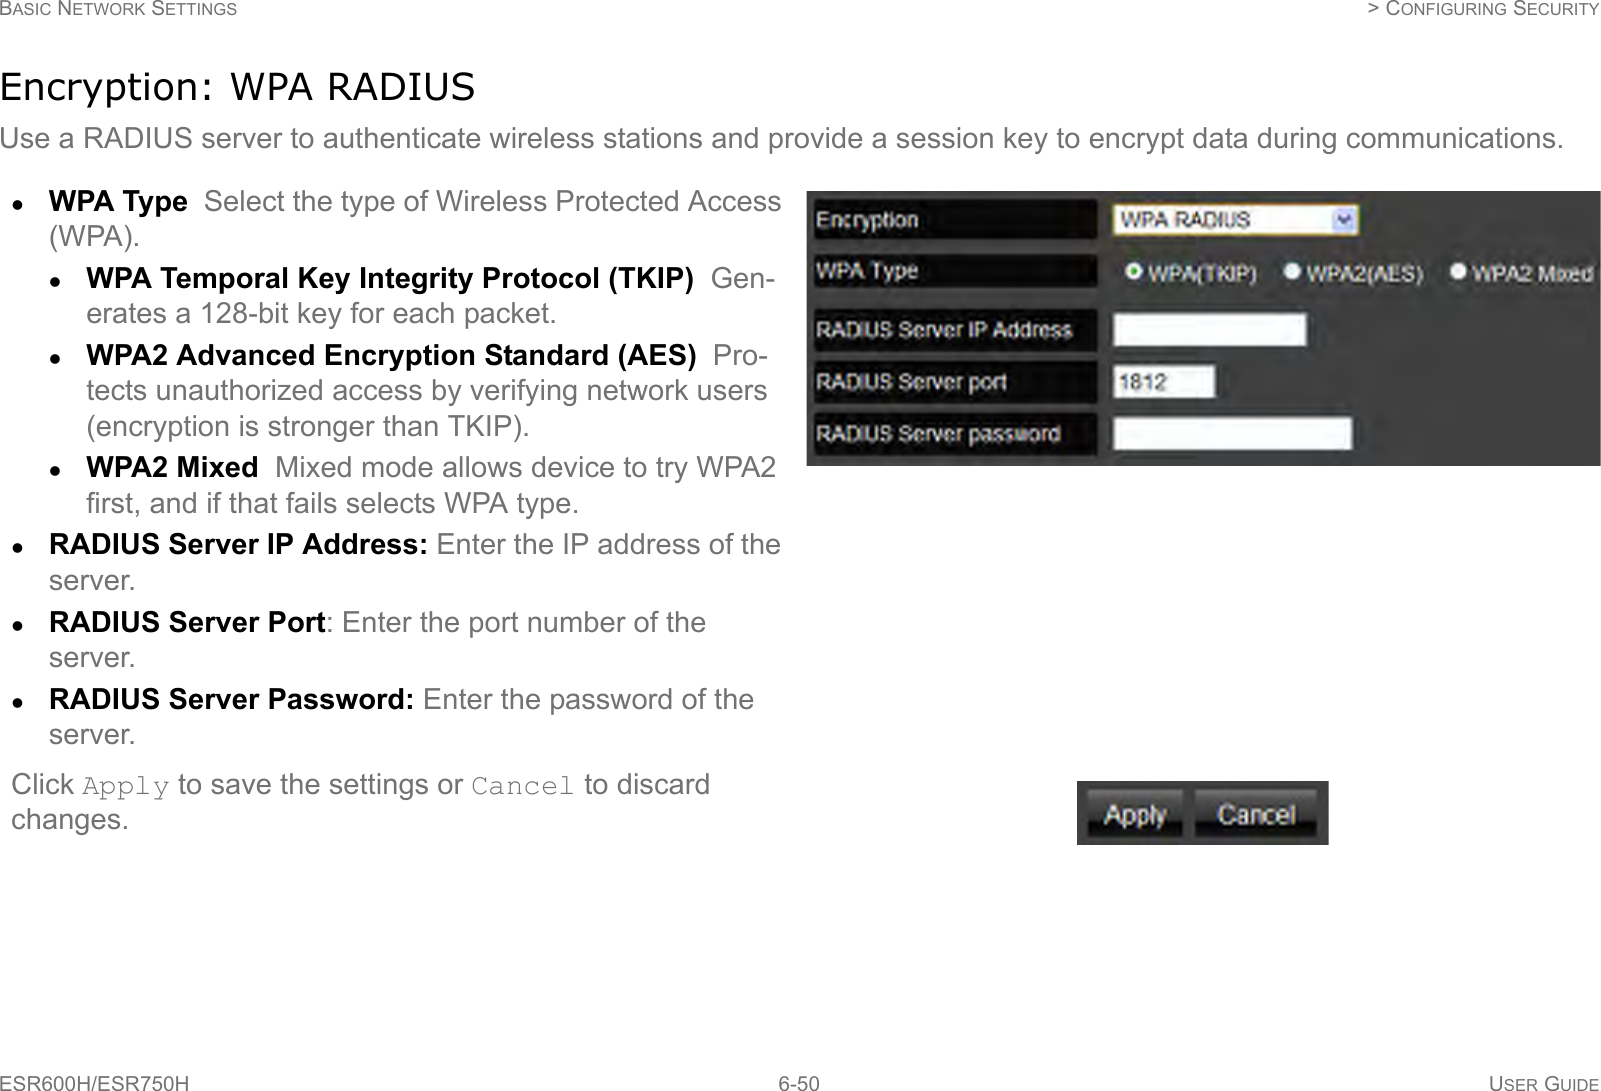 BASIC NETWORK SETTINGS  &gt; CONFIGURING SECURITYESR600H/ESR750H 6-50 USER GUIDEEncryption: WPA RADIUSUse a RADIUS server to authenticate wireless stations and provide a session key to encrypt data during communications.WPA Type  Select the type of Wireless Protected Access (WPA). WPA Temporal Key Integrity Protocol (TKIP)  Gen-erates a 128-bit key for each packet.WPA2 Advanced Encryption Standard (AES)  Pro-tects unauthorized access by verifying network users (encryption is stronger than TKIP).WPA2 Mixed  Mixed mode allows device to try WPA2 first, and if that fails selects WPA type.RADIUS Server IP Address: Enter the IP address of the server.RADIUS Server Port: Enter the port number of the server.RADIUS Server Password: Enter the password of the server.Click Apply to save the settings or Cancel to discard changes.